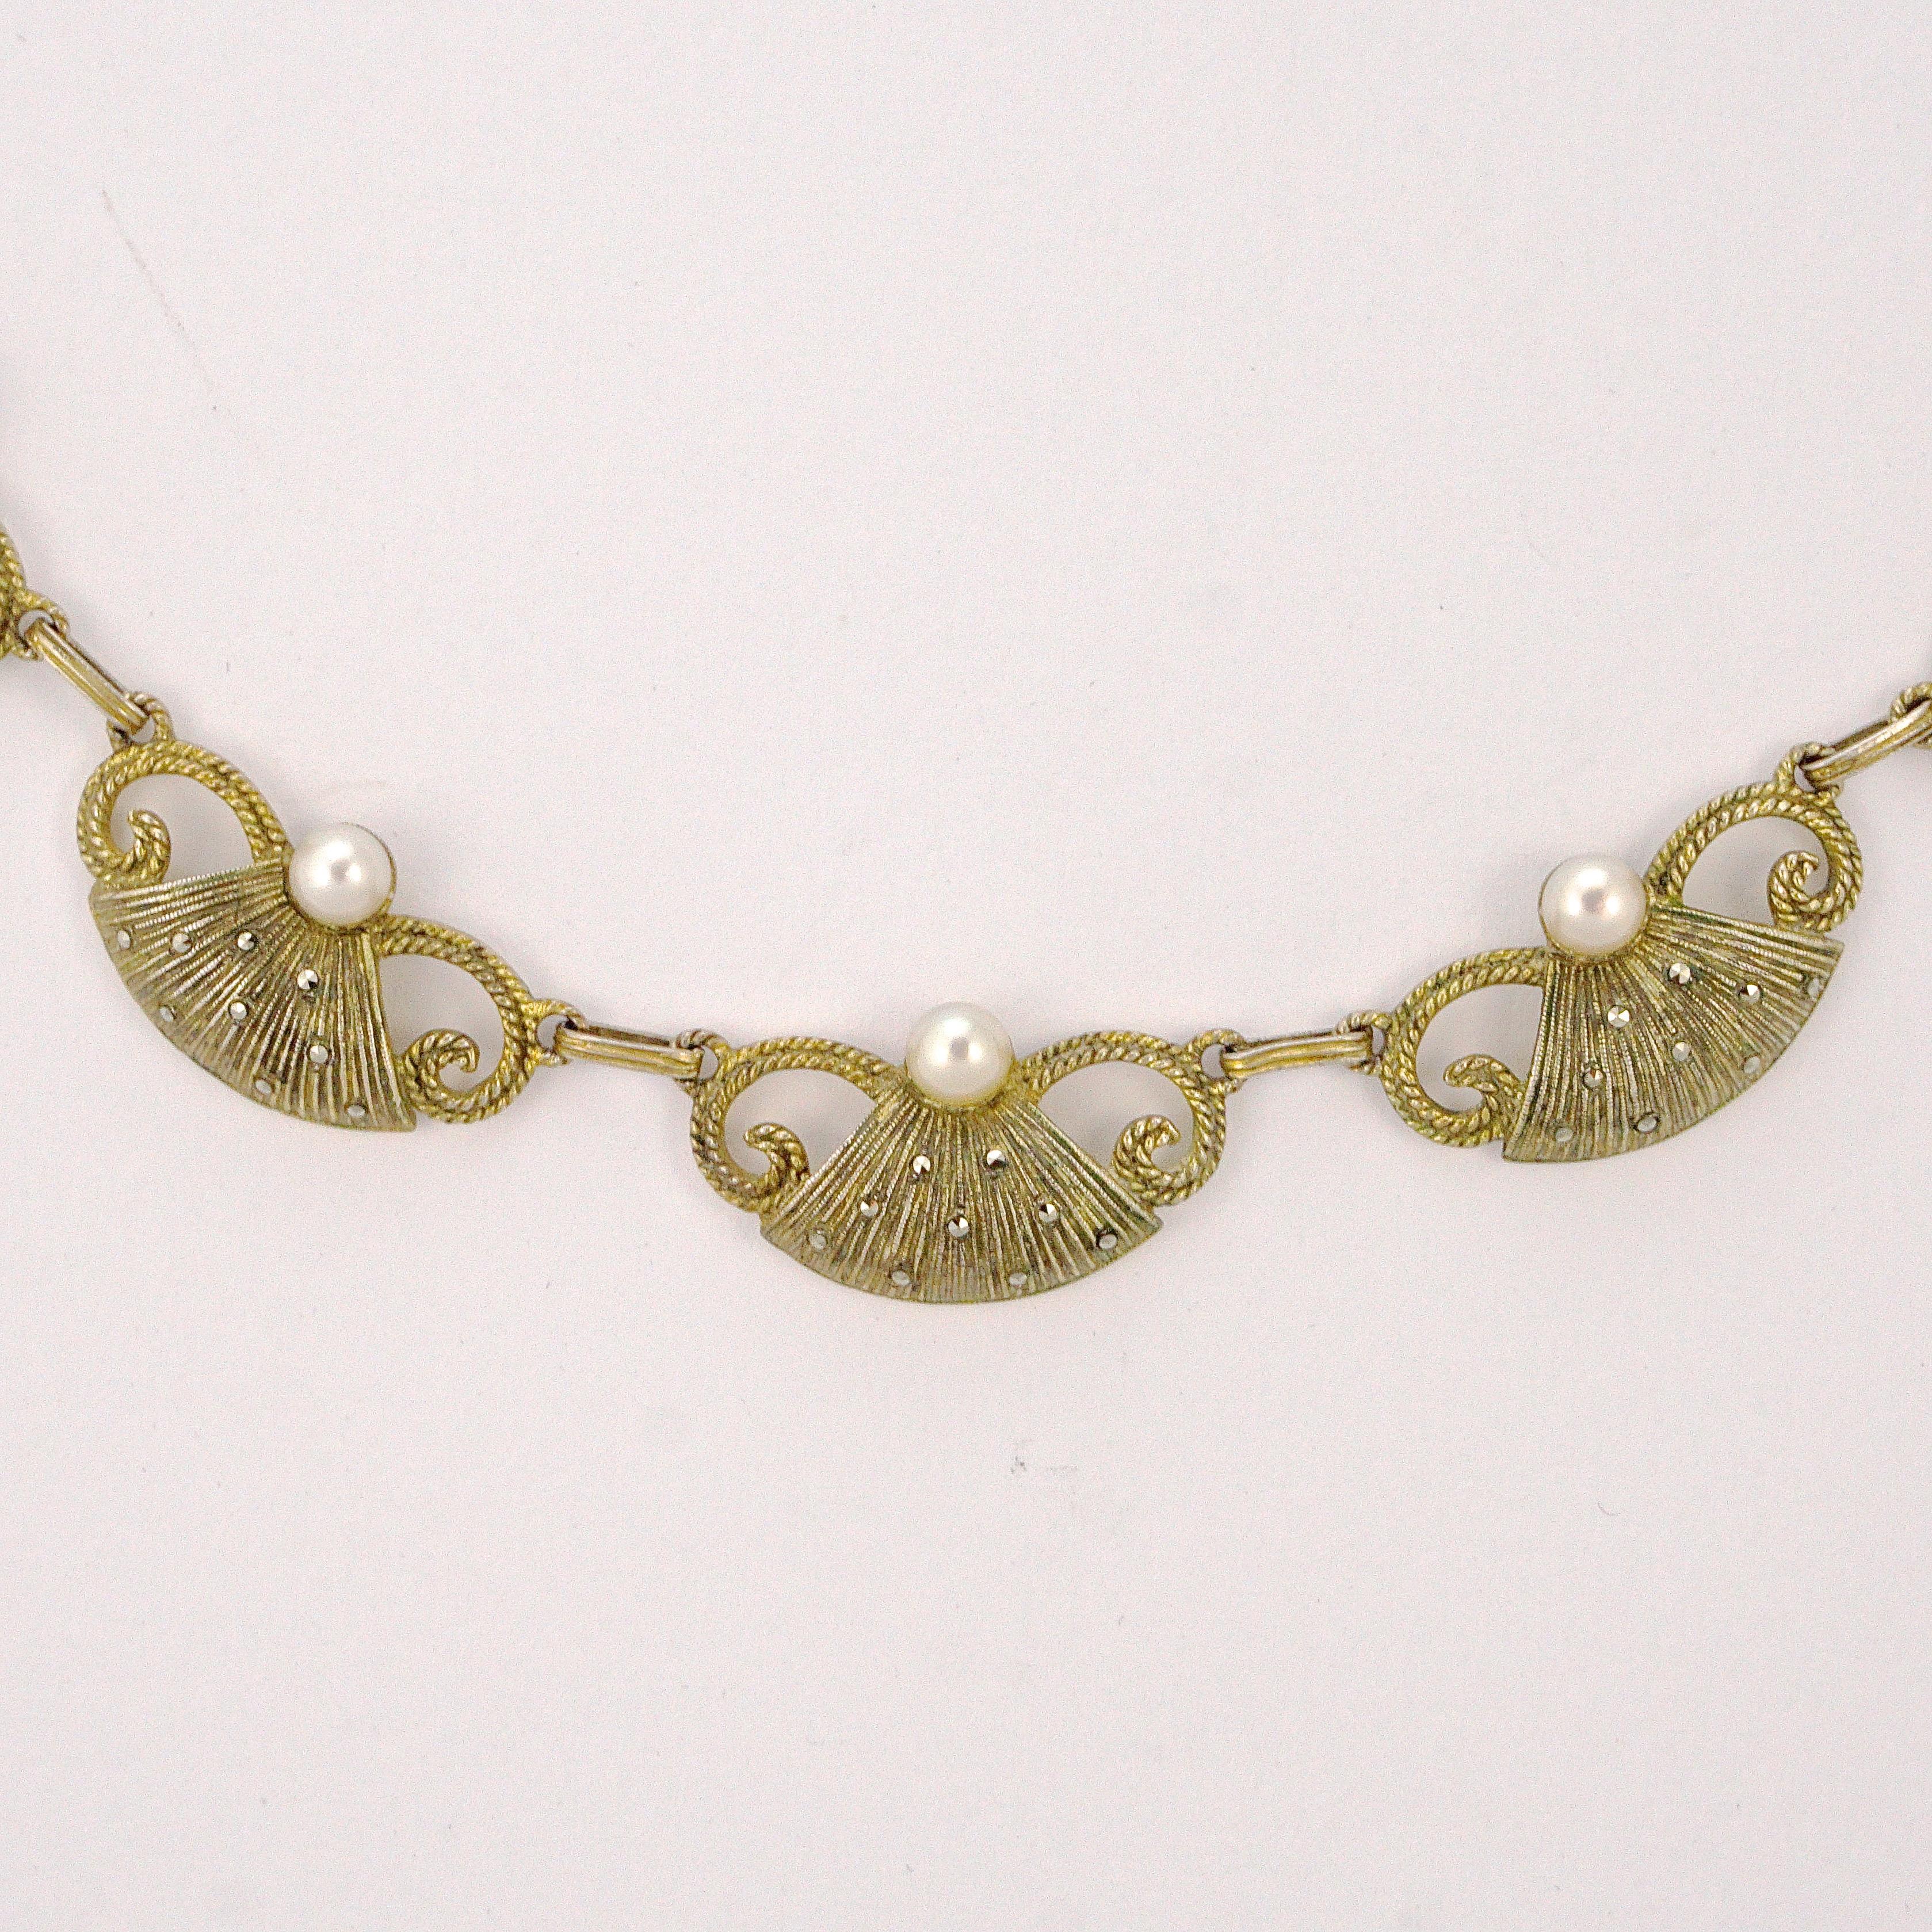 Superb Art Deco Theodor Fahrner sterling silver gilt textured necklace, designed with five beautiful links embellished with marcasites and cream cultured pearls, and a rectangular link chain with marcasites. The back is smooth. Measuring length